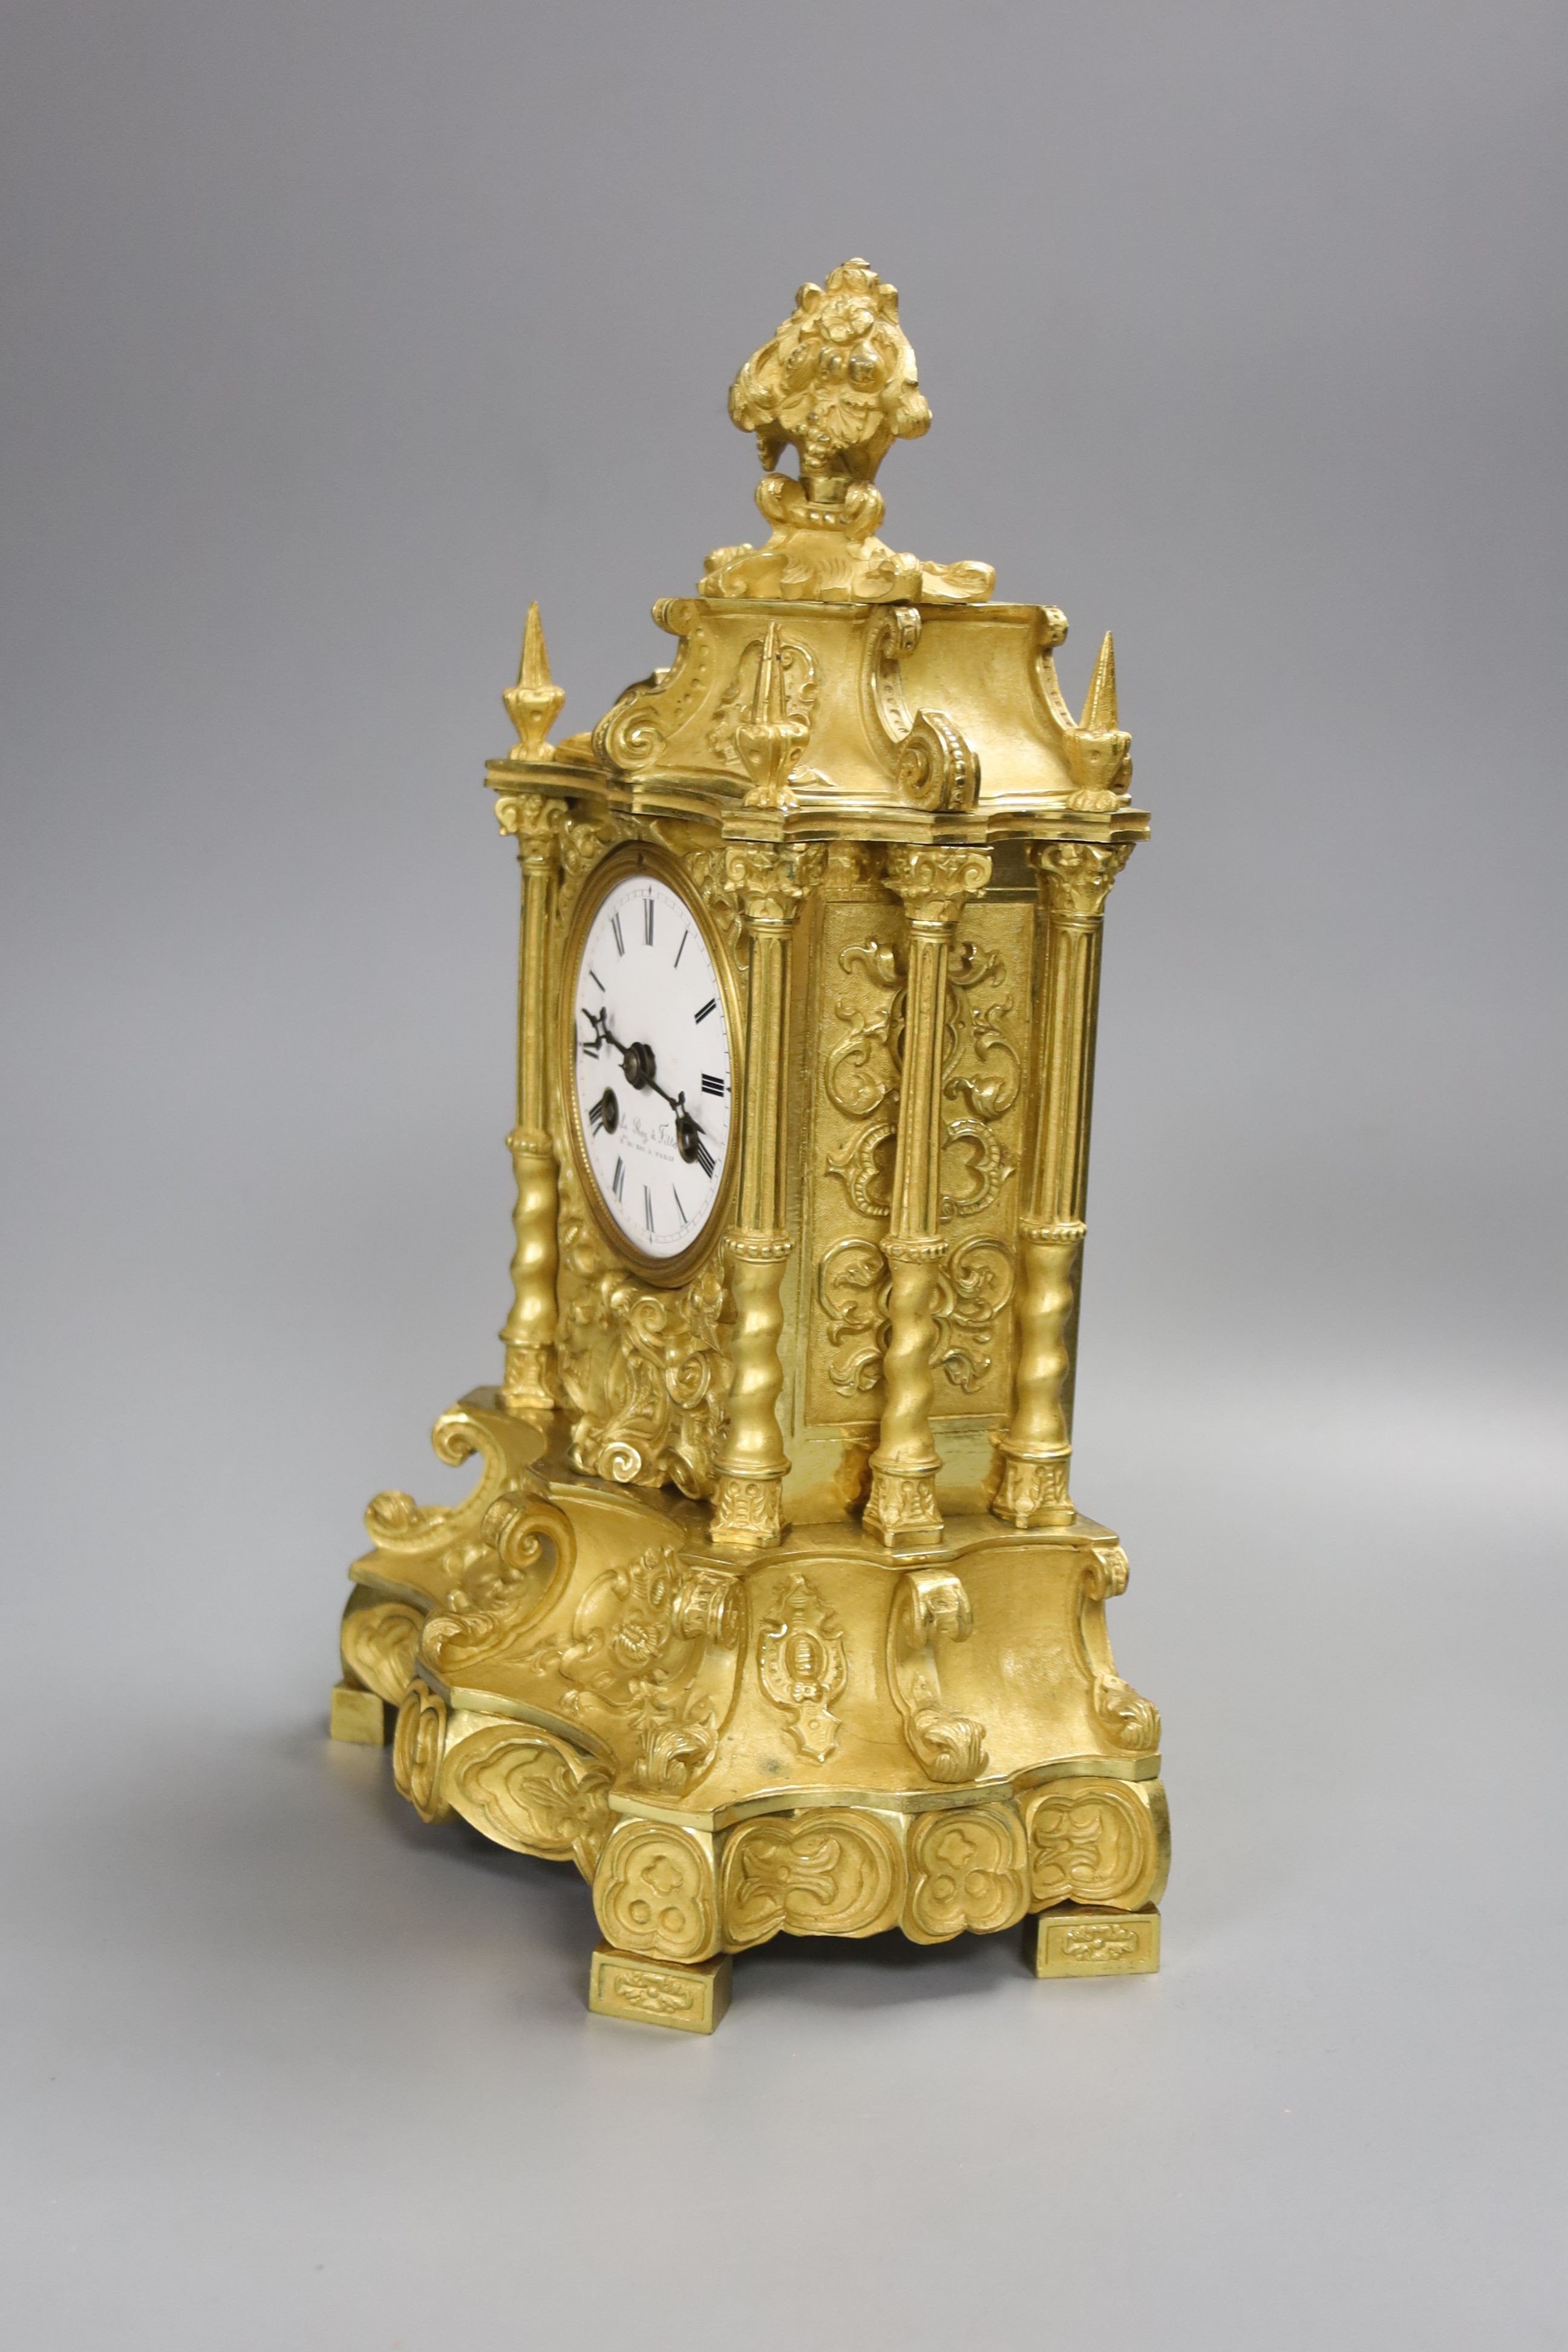 A mid 19th century French gilt bronze mantel clock, dial signed Le Roy & Fils, Paris, Japy movement, height 31cm